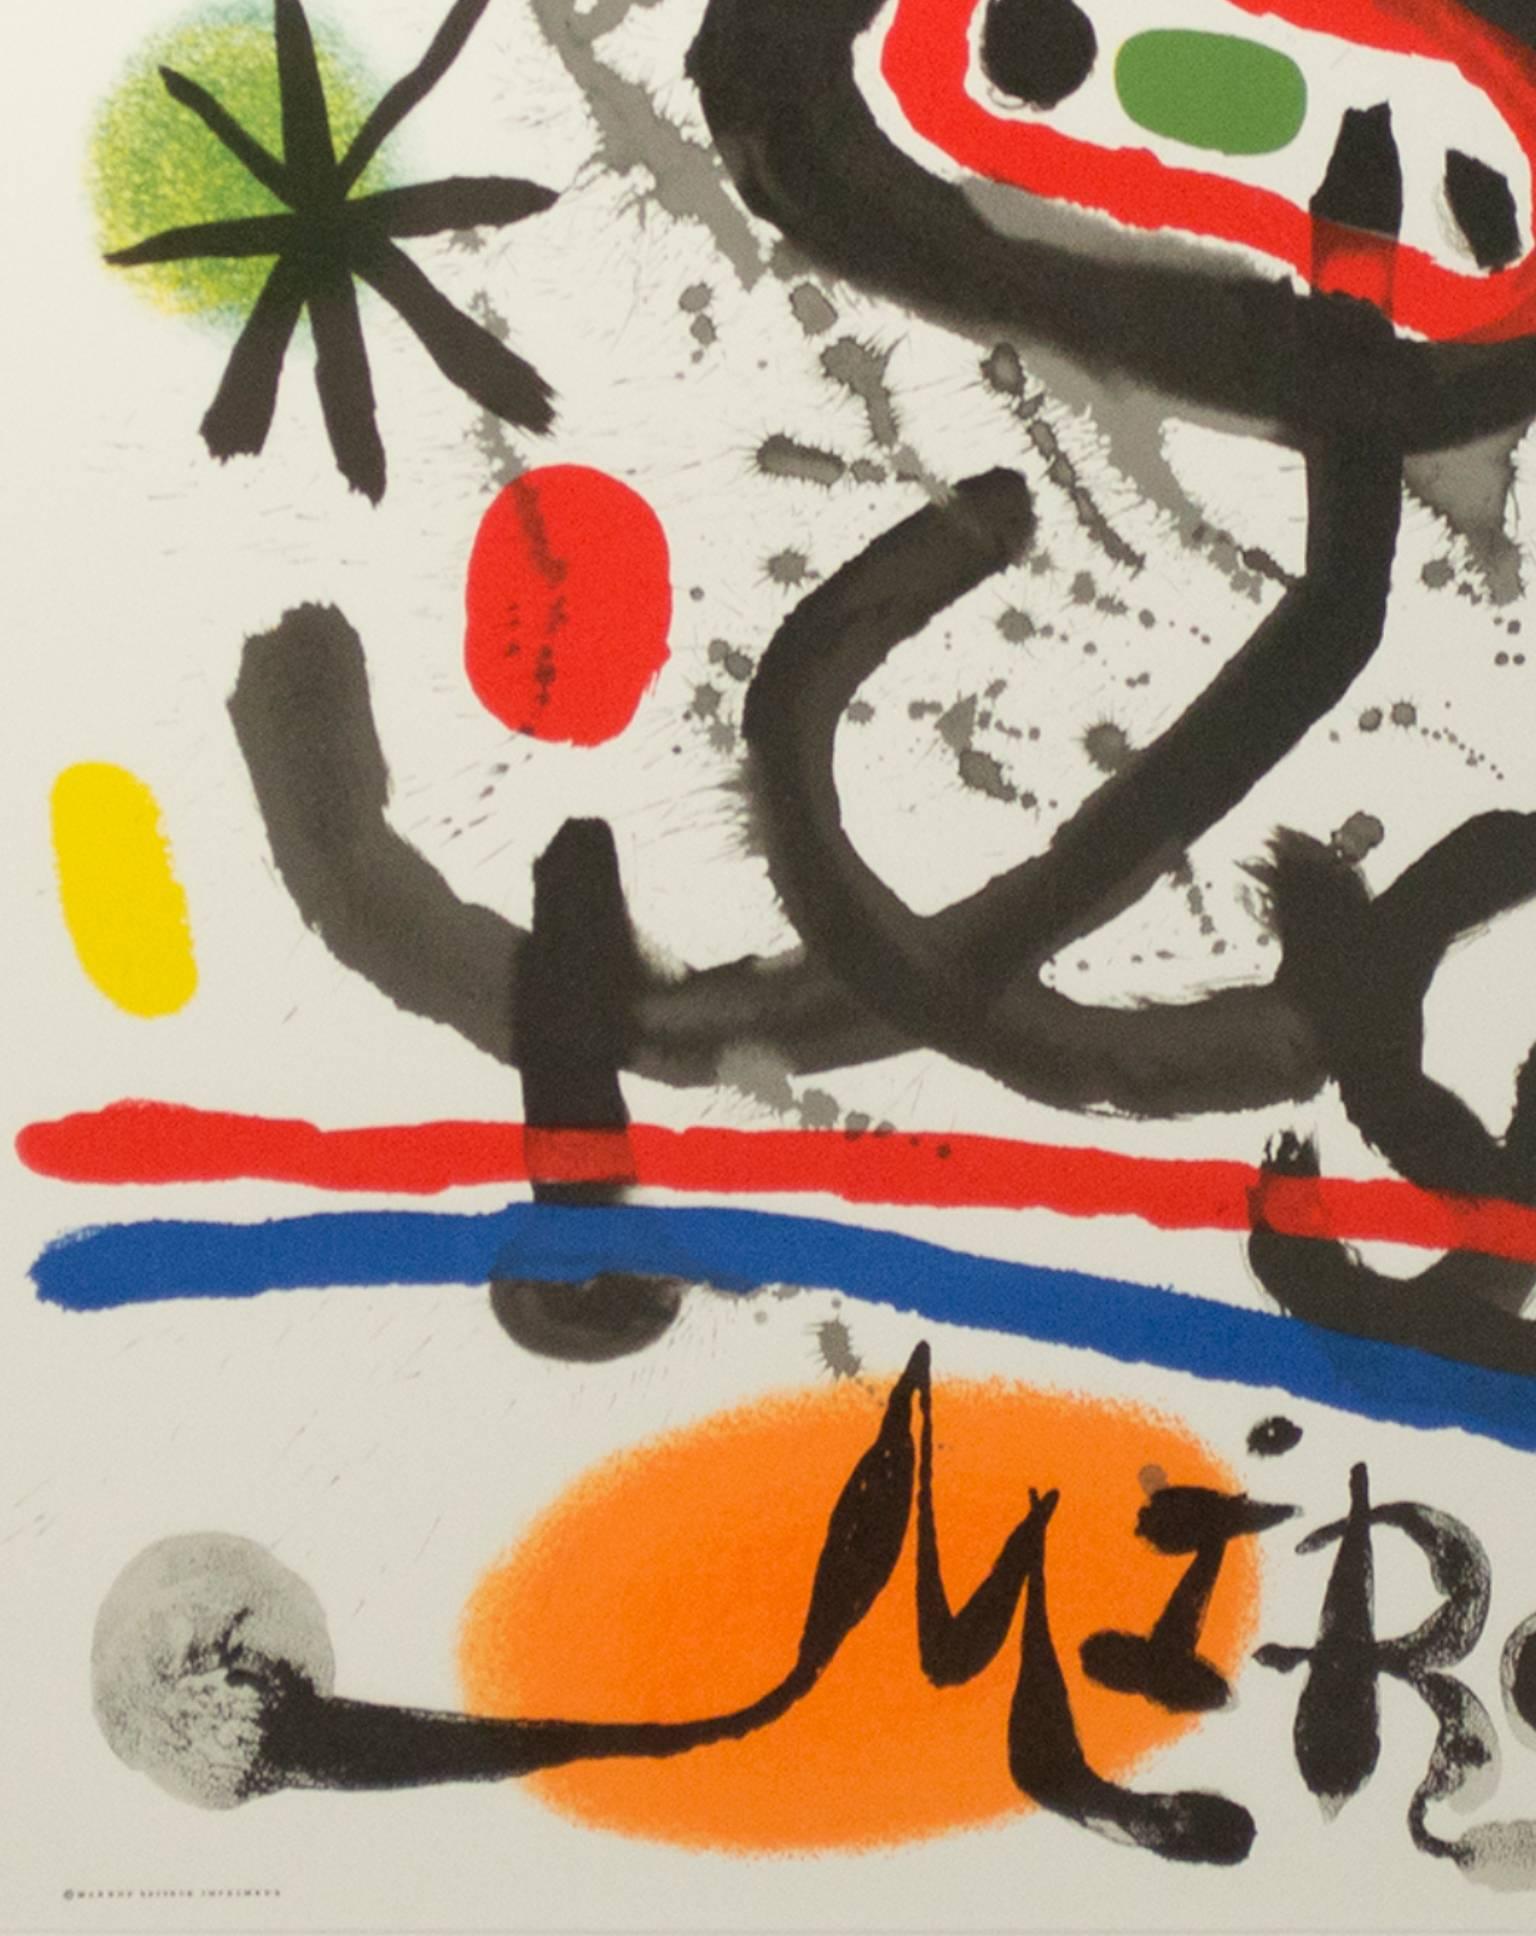 Abstract color lithograph 20th century poster signed - Print by Joan Miró